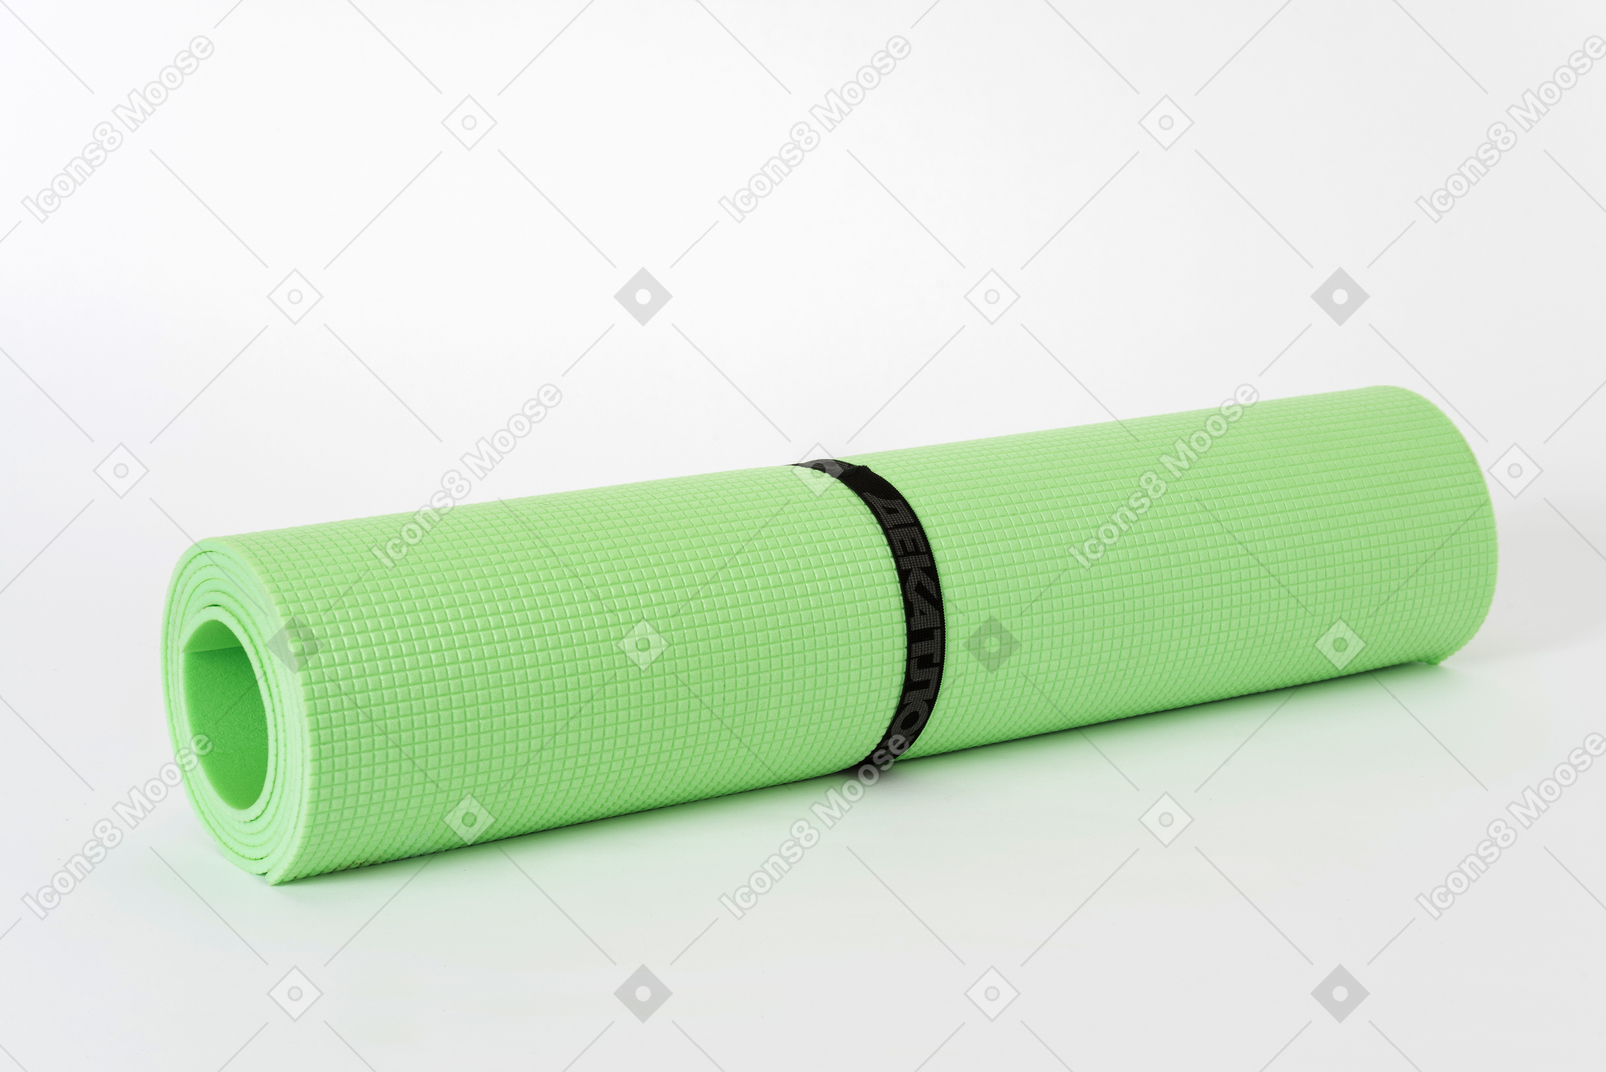 Green yoga mat on a white background